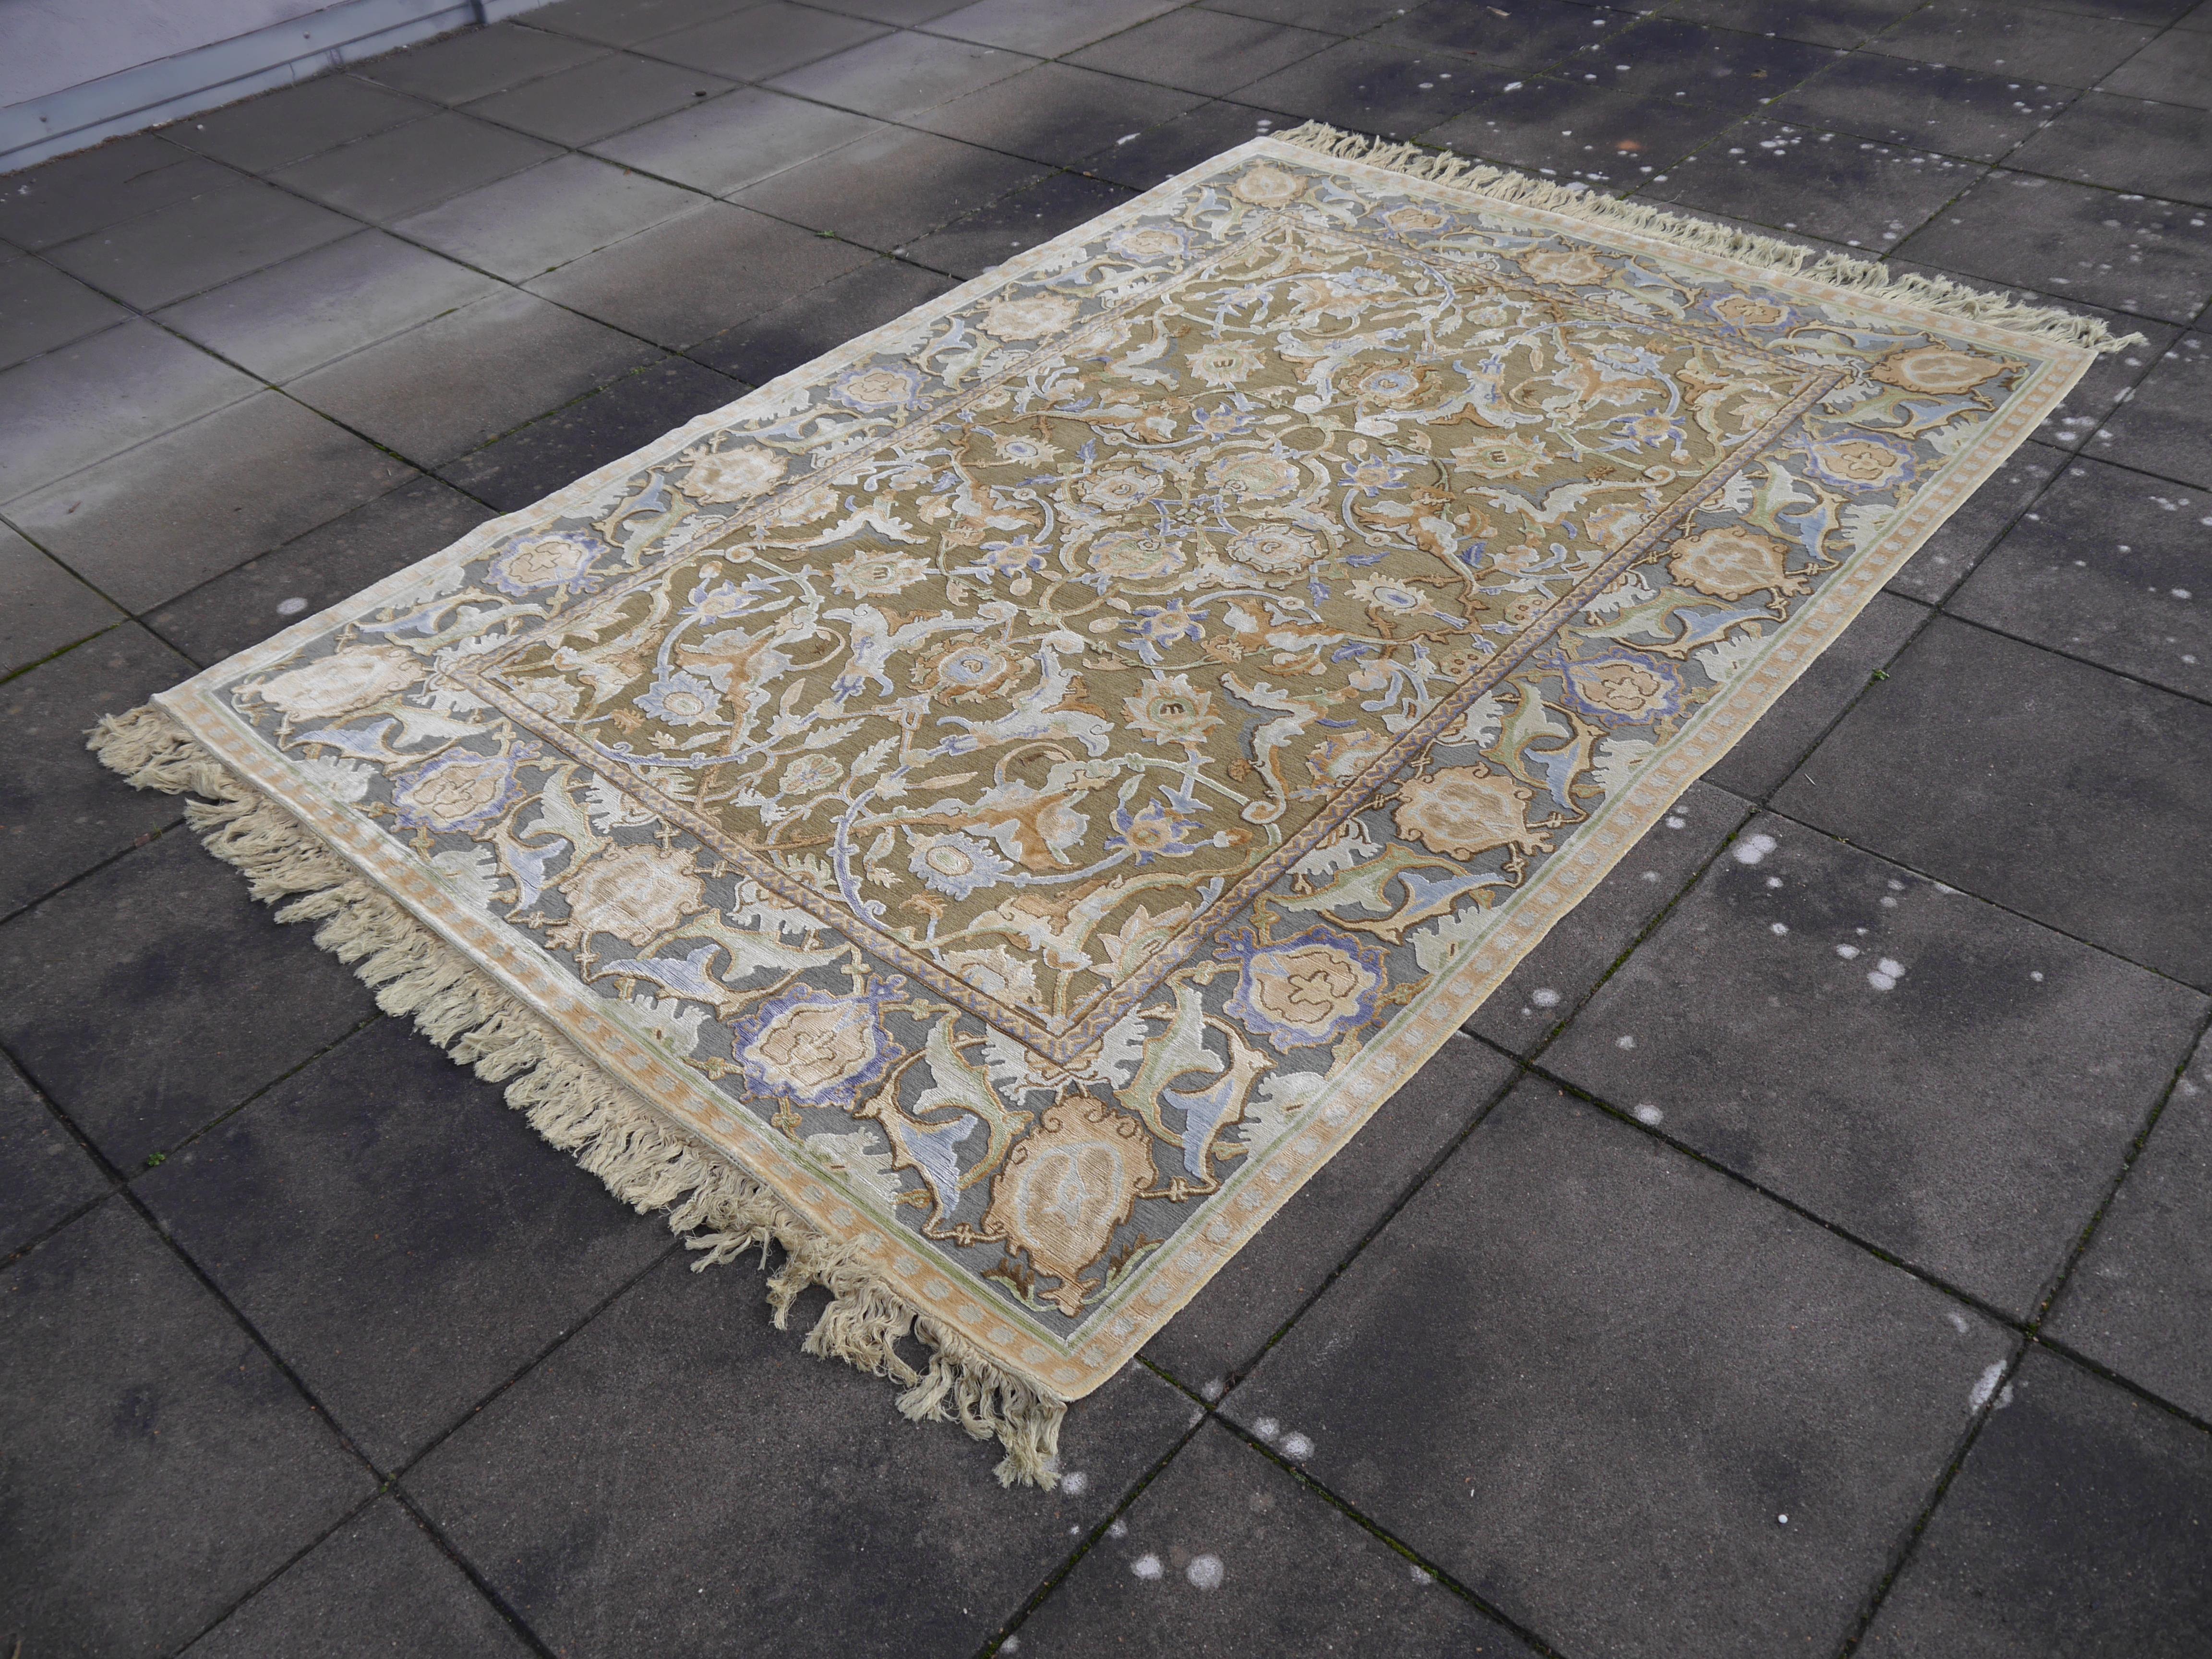 New Polonaise Rug Silk and Wool Antique Isfahan Design Bespoke Sizes 9